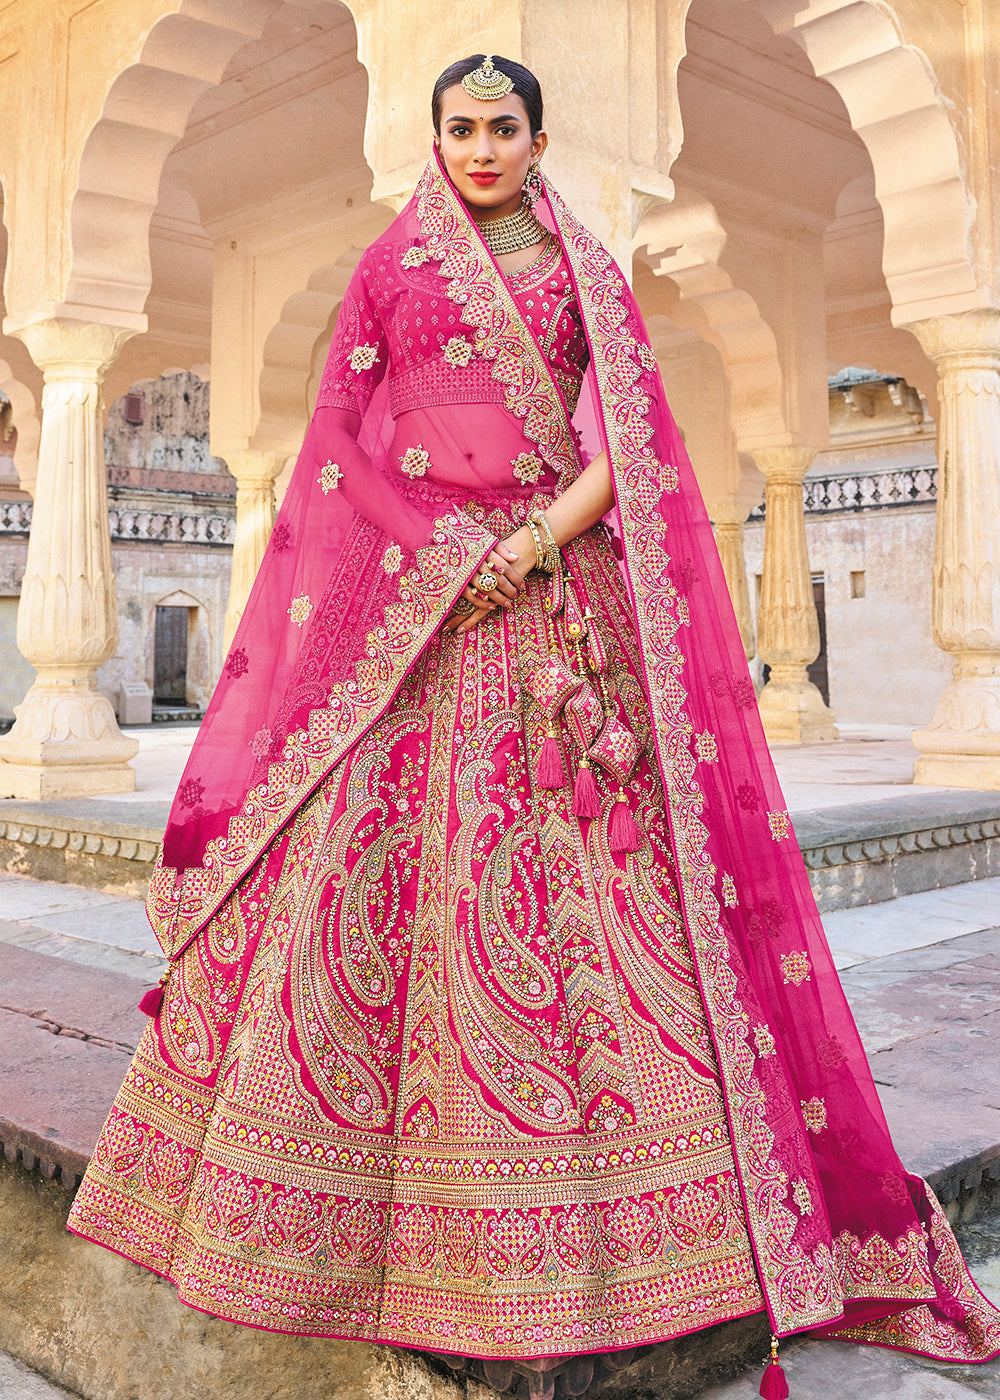 Buy Now Magenta Pink Bridal Wear Heavy Embroidered Silk Lehenga Choli Online in USA, UK, Canada & Worldwide at Empress Clothing.